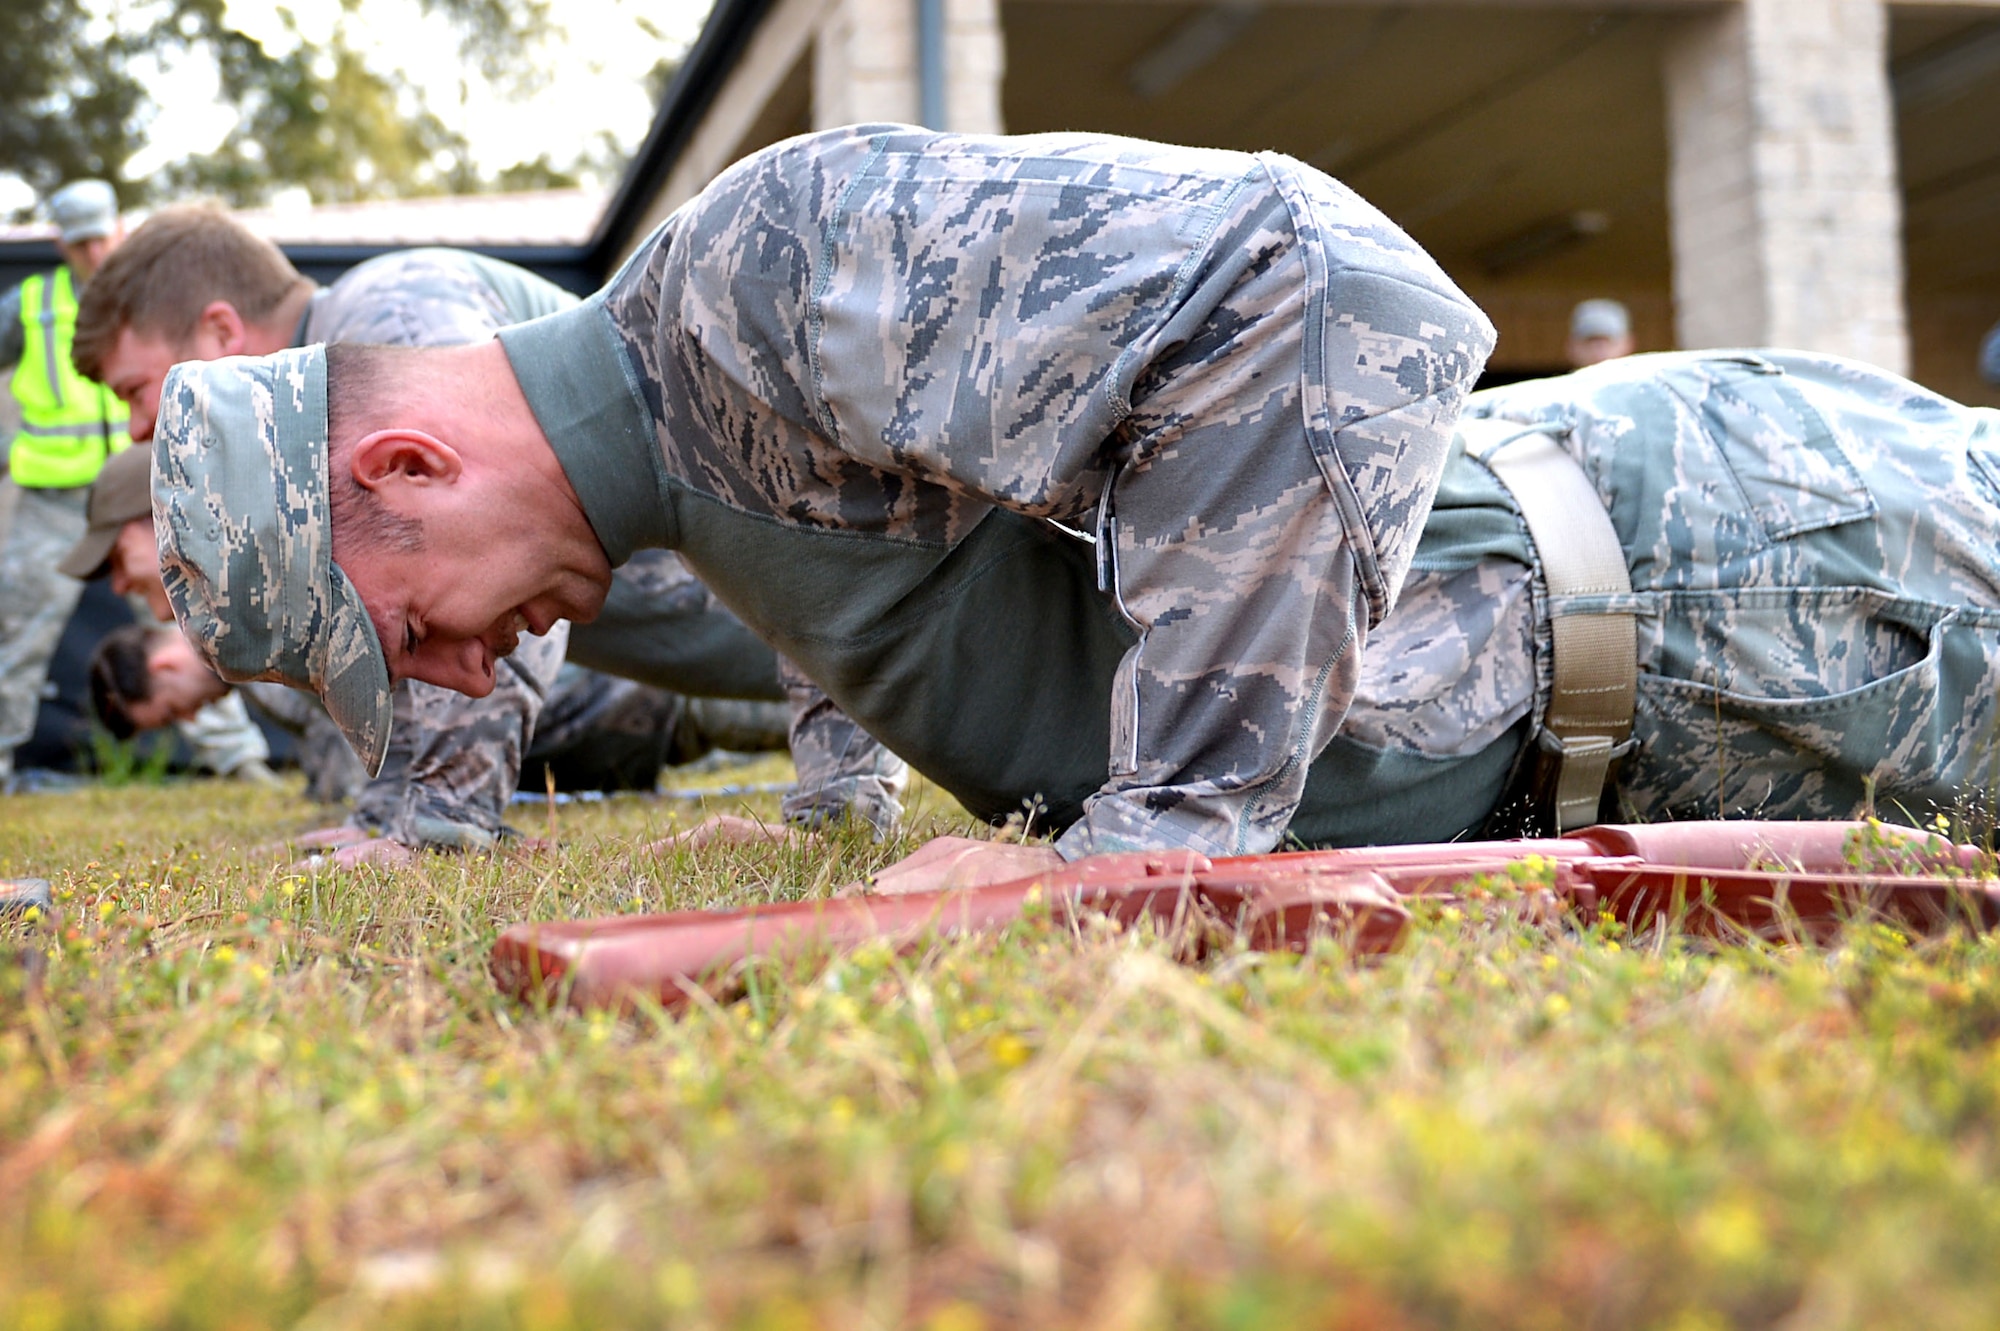 U.S. Air Force Staff Sgt. Jason Perkins, 20th Security Forces Squadron (SFS) unit trainer, performs a push-up wearing a weighted uniform during the 20th SFS Combat Challenge at Shaw Air Force Base, S.C., March 24, 2017. The obstacle courses consisted of a 45-pound ruck march, chemical warfare memory games and many other challenges, each focusing on different aspects of a 20th SFS Airman, or defender’s, career. (U.S. Air Force photo by Airman 1st Class Christopher Maldonado)